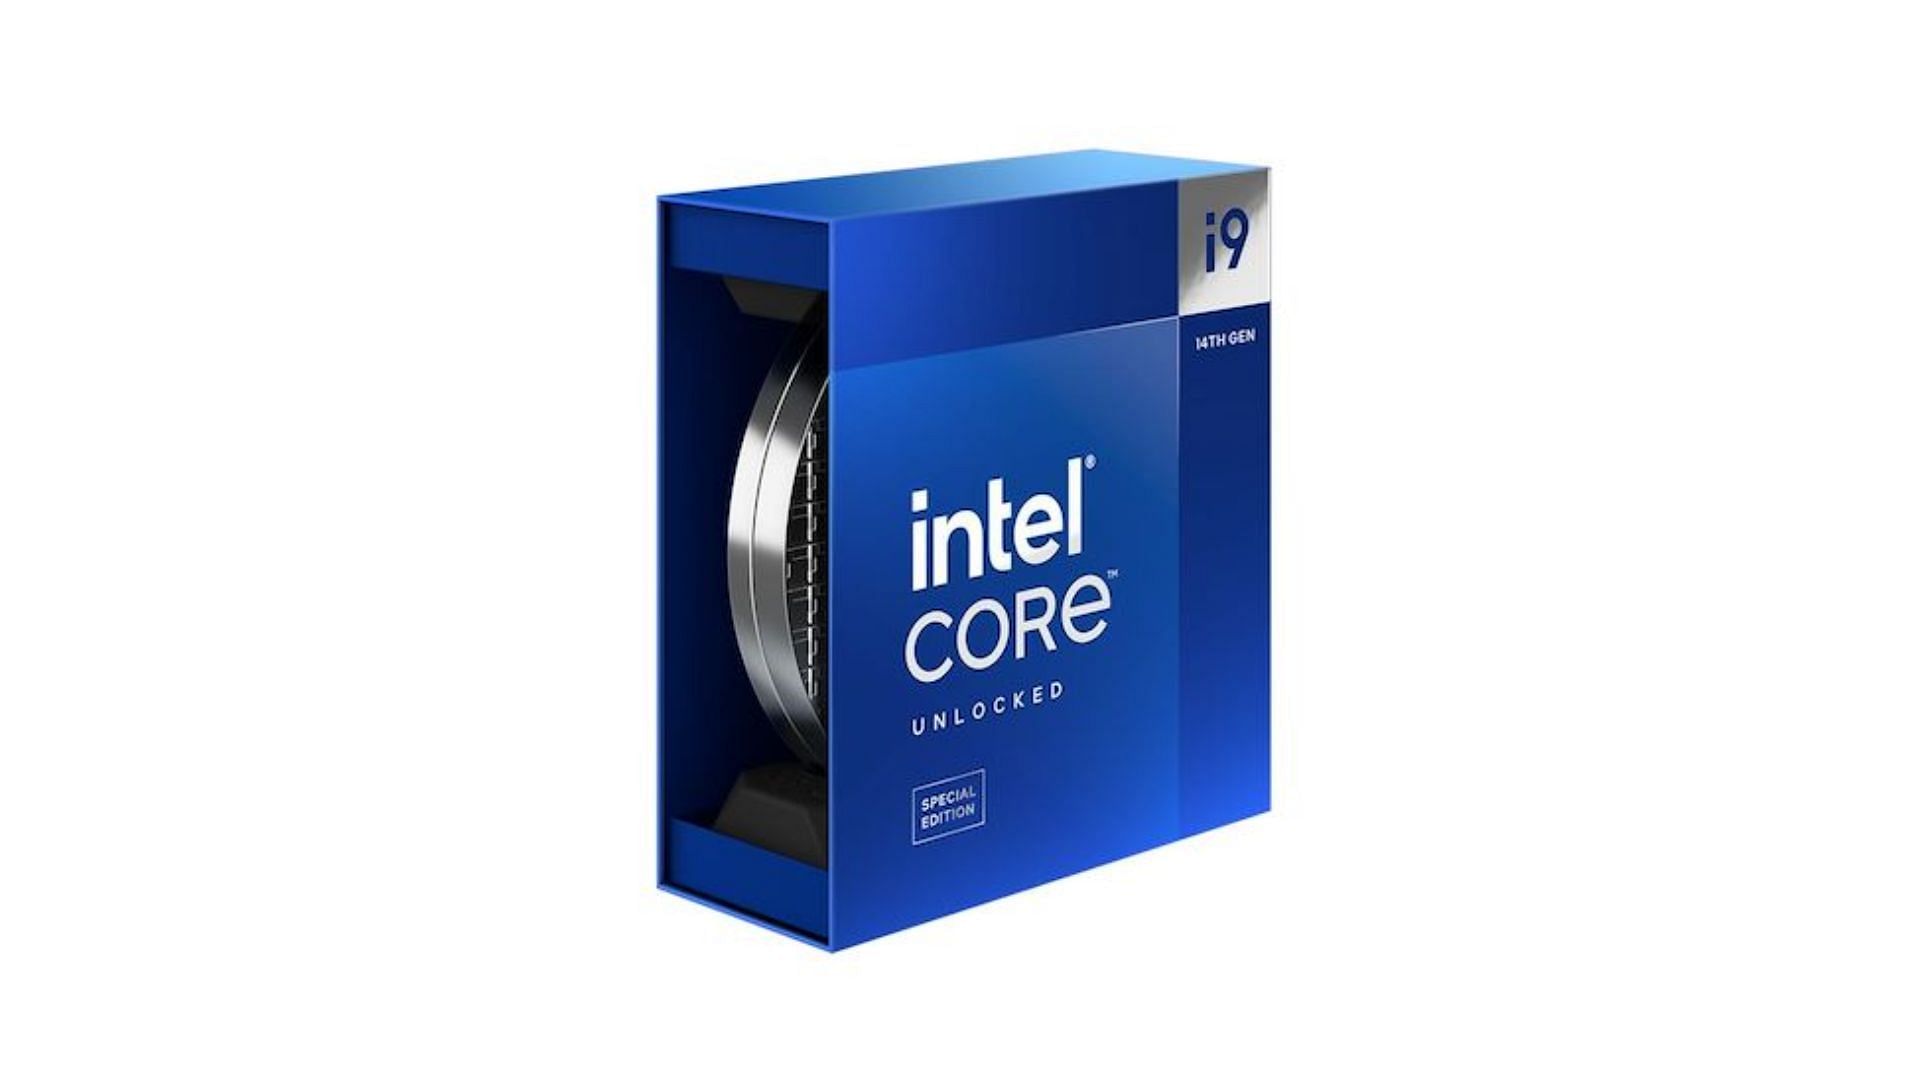 The Intel Core i9-14900KS comes with a new packaging design. (Image via Intel)